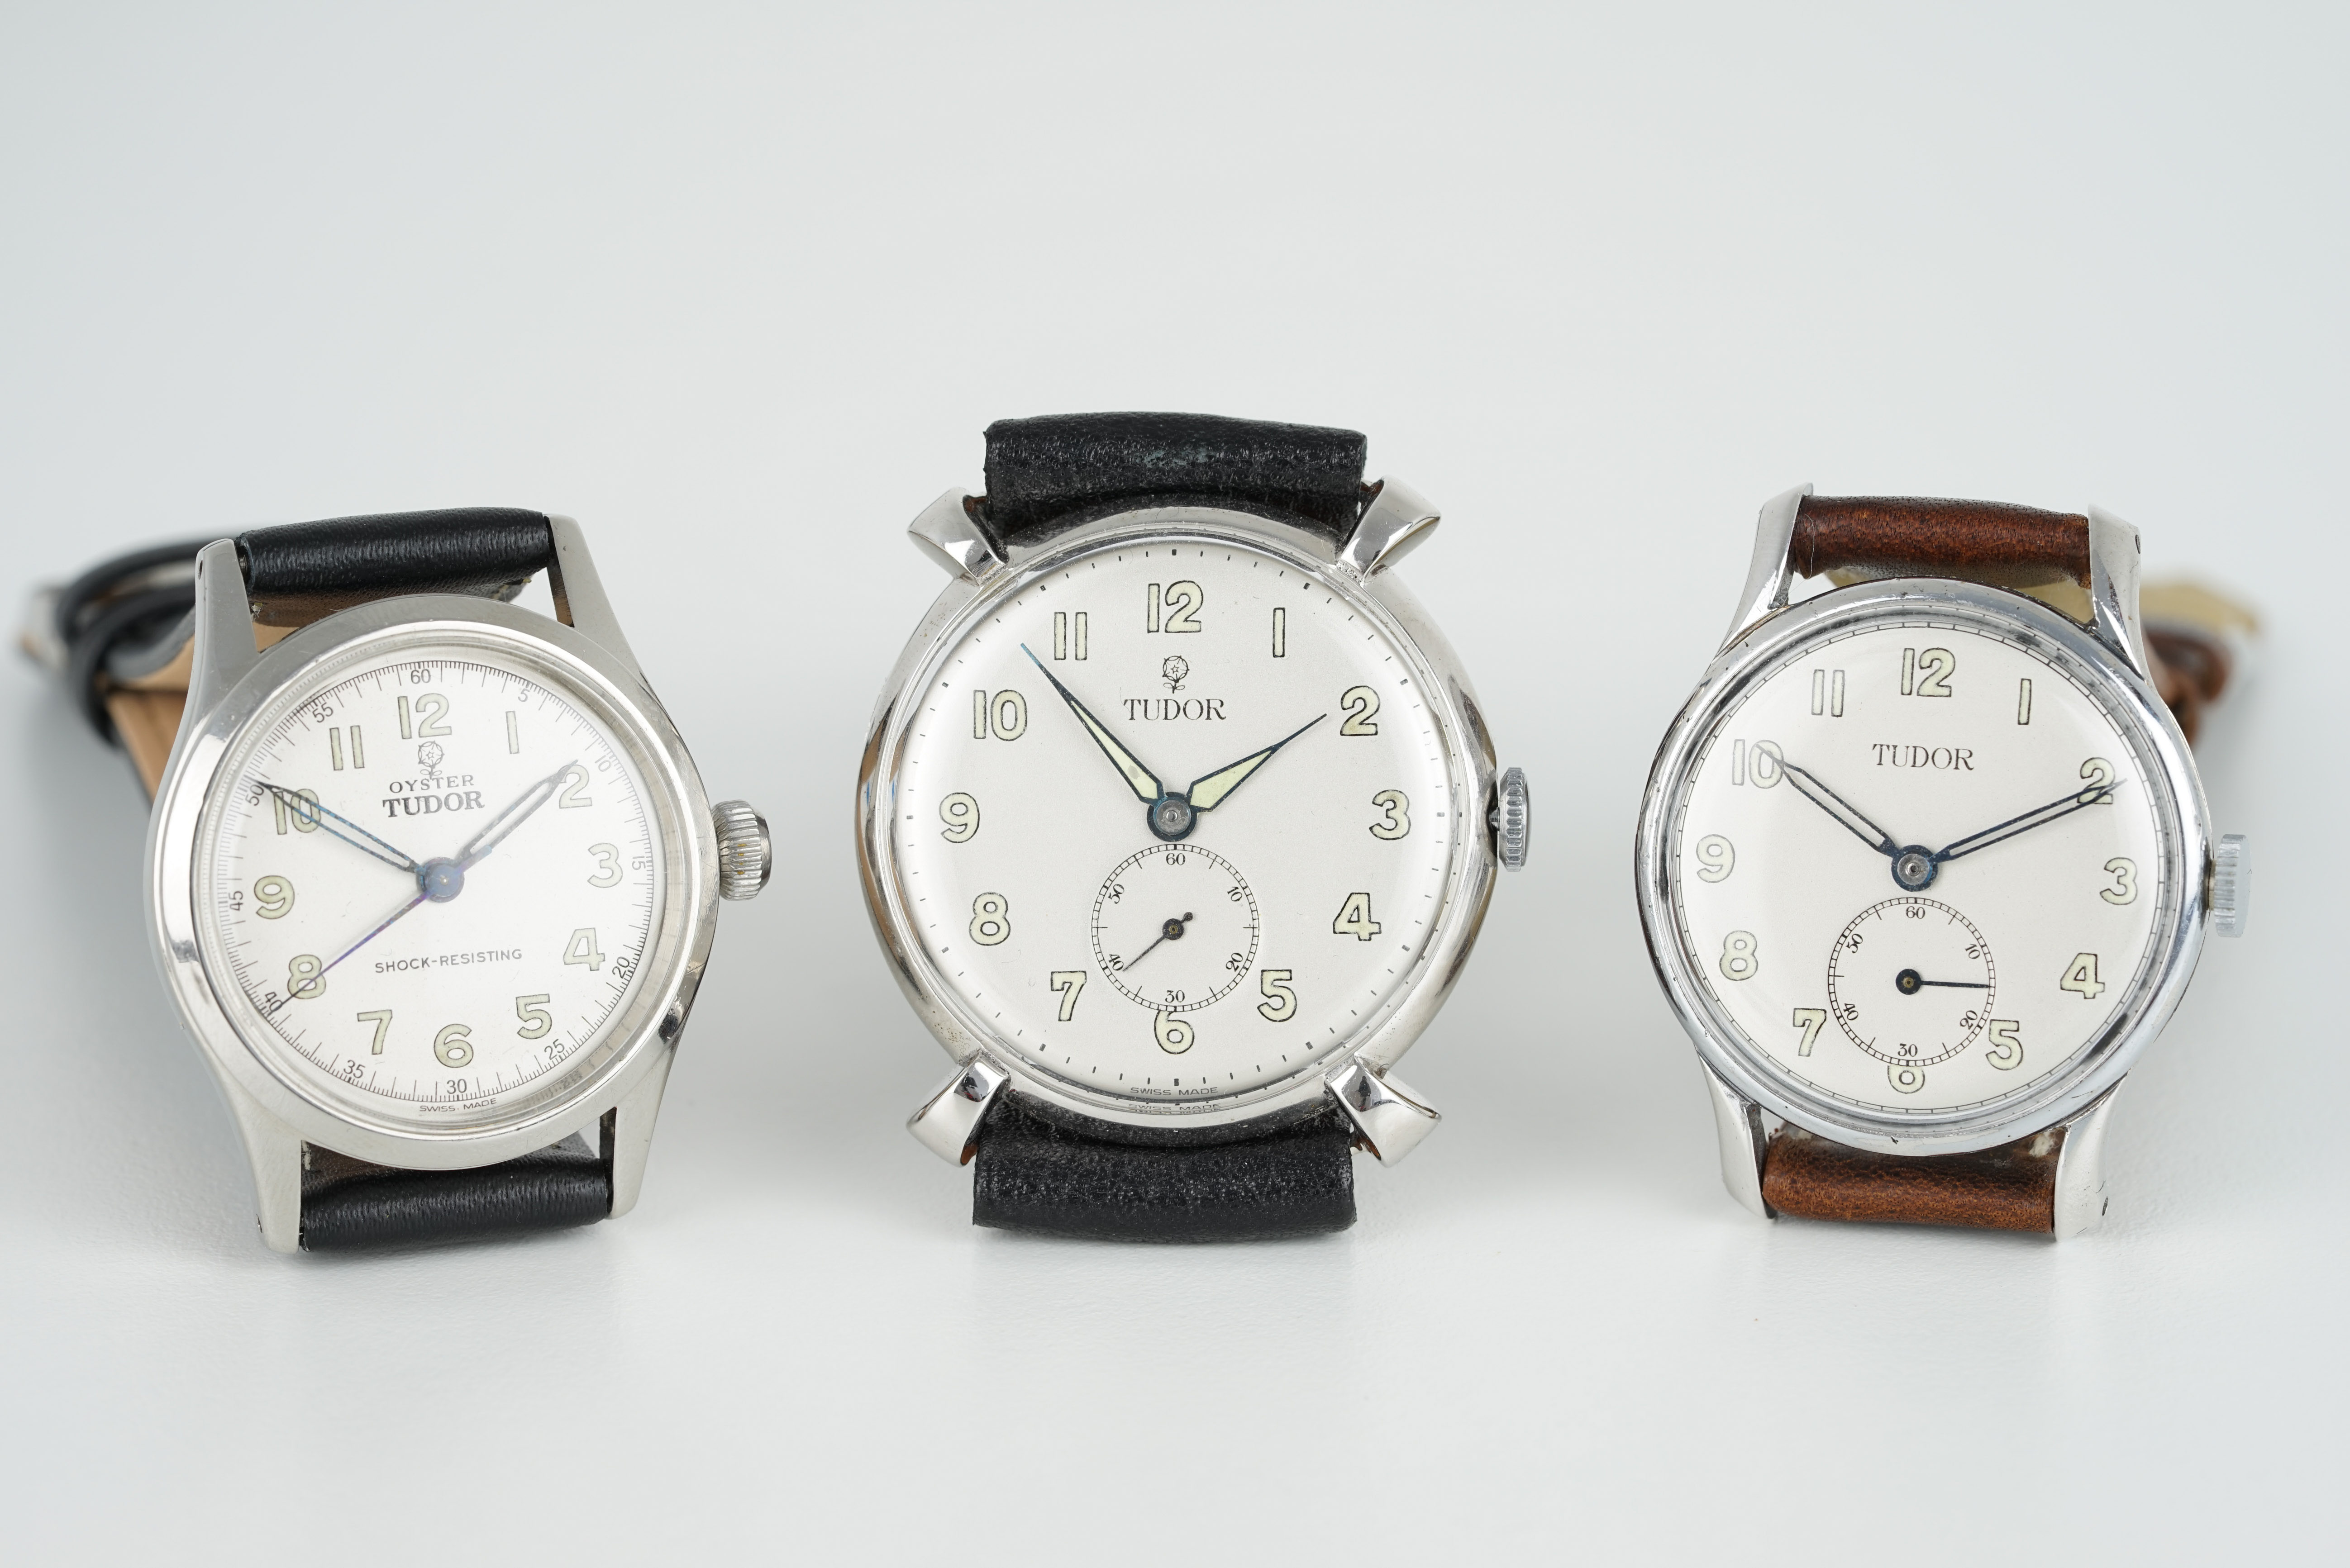 GROUP OF 3 TUDOR WRISTWATCHES, group of three tudor wristwatches with re finished dials, 30-35mm